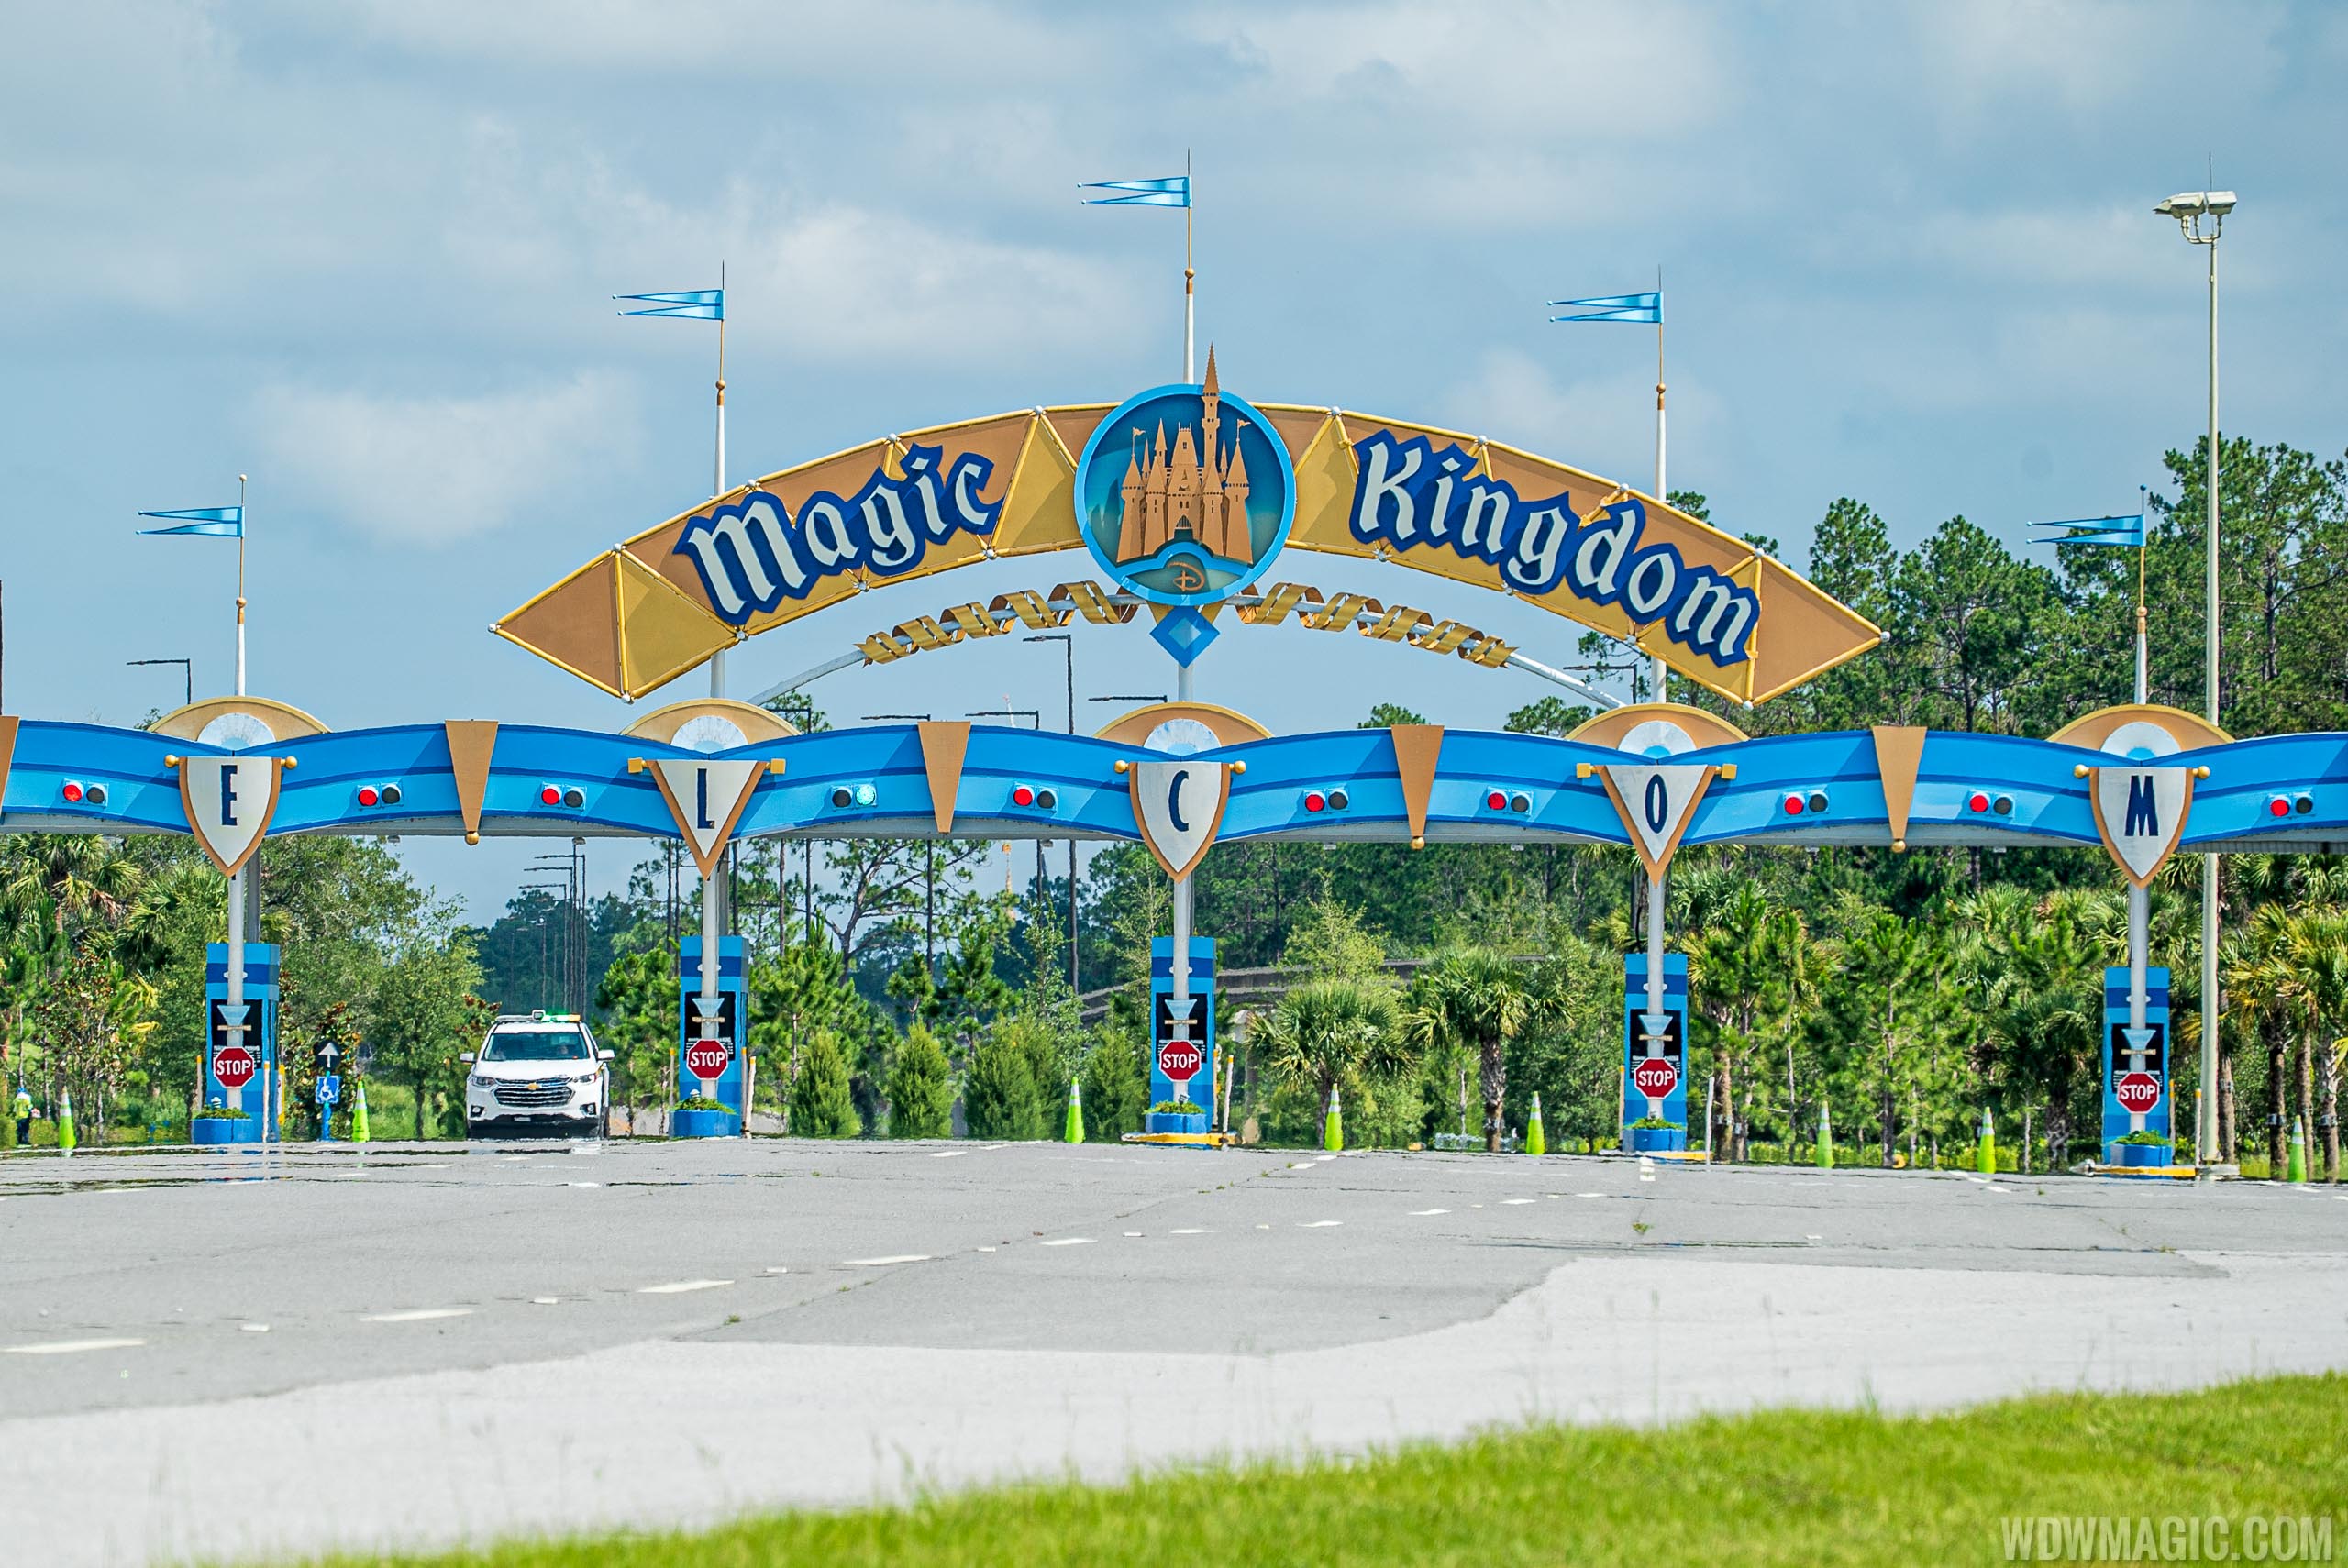 New filing with the state shows Walt Disney World has laid off 11350 union Cast Members